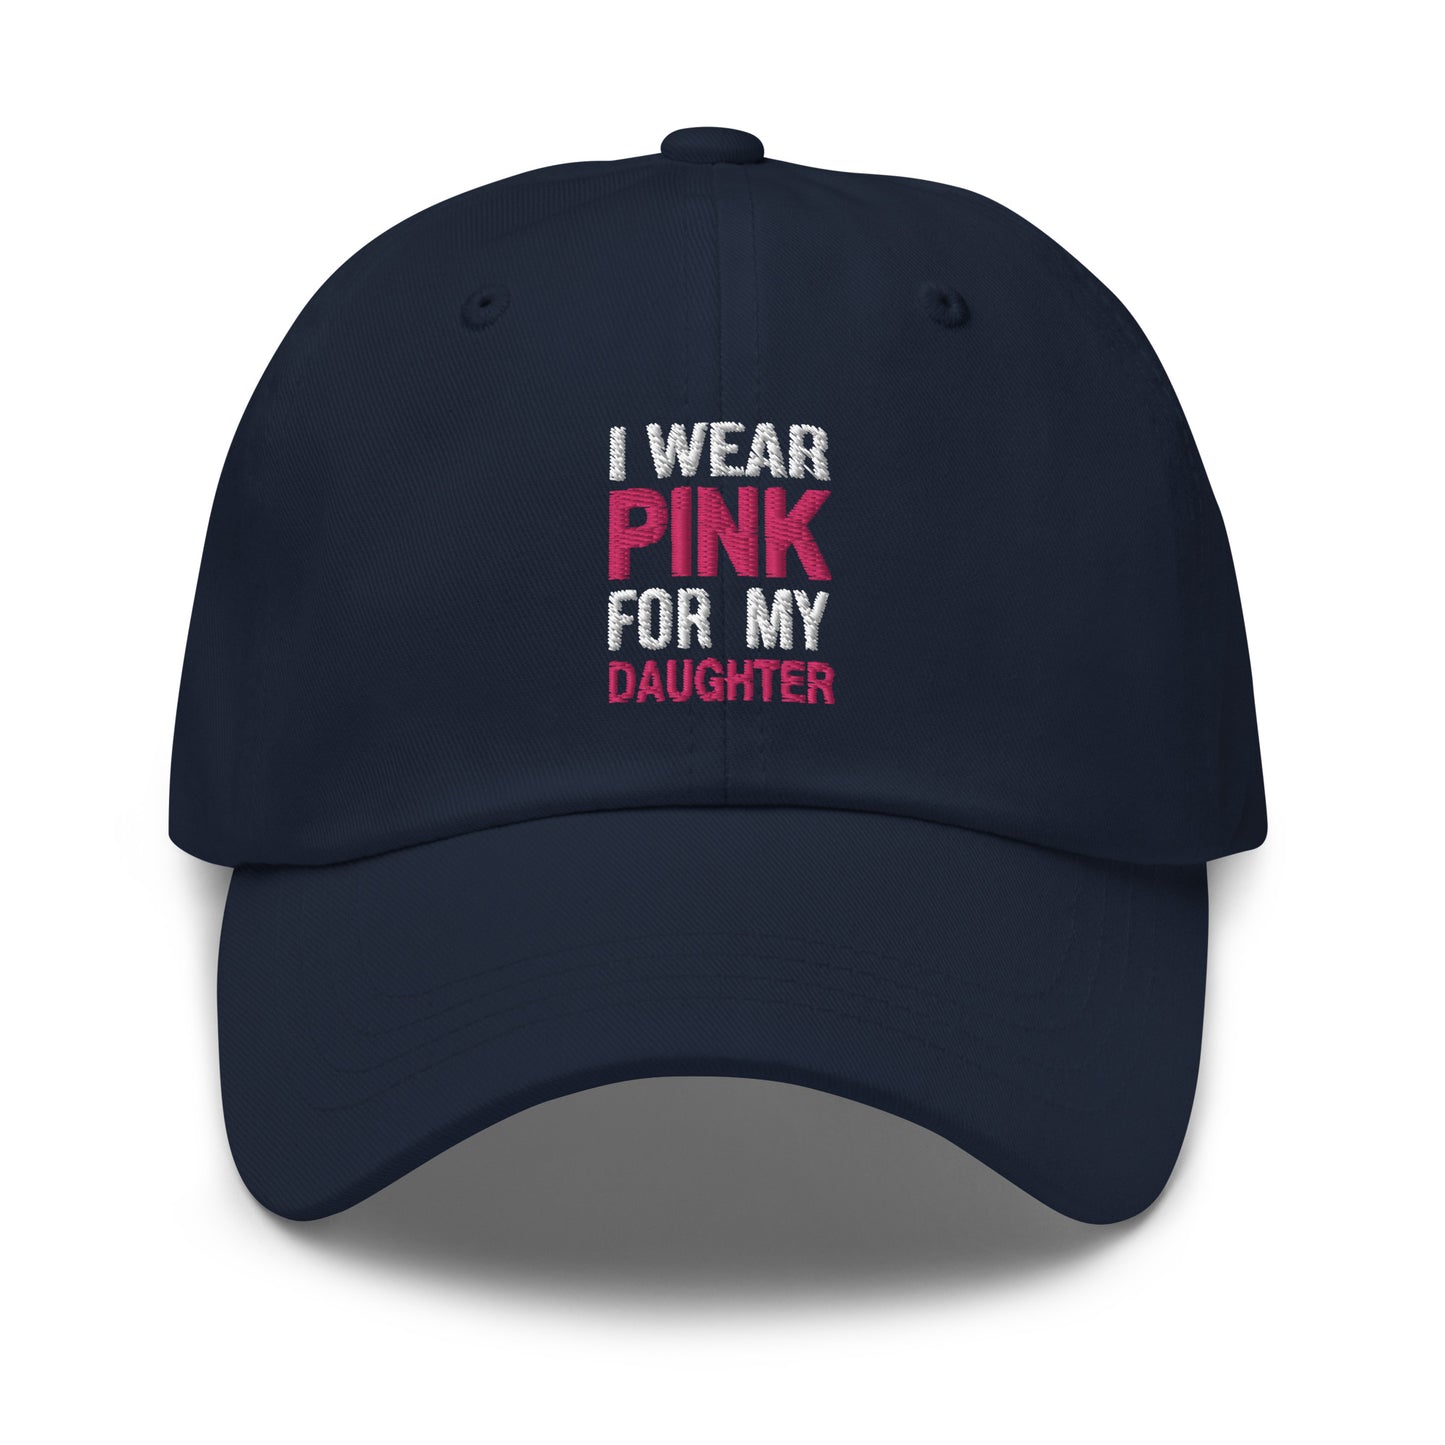 I Wear Pink For My Daughter Baseball Hat